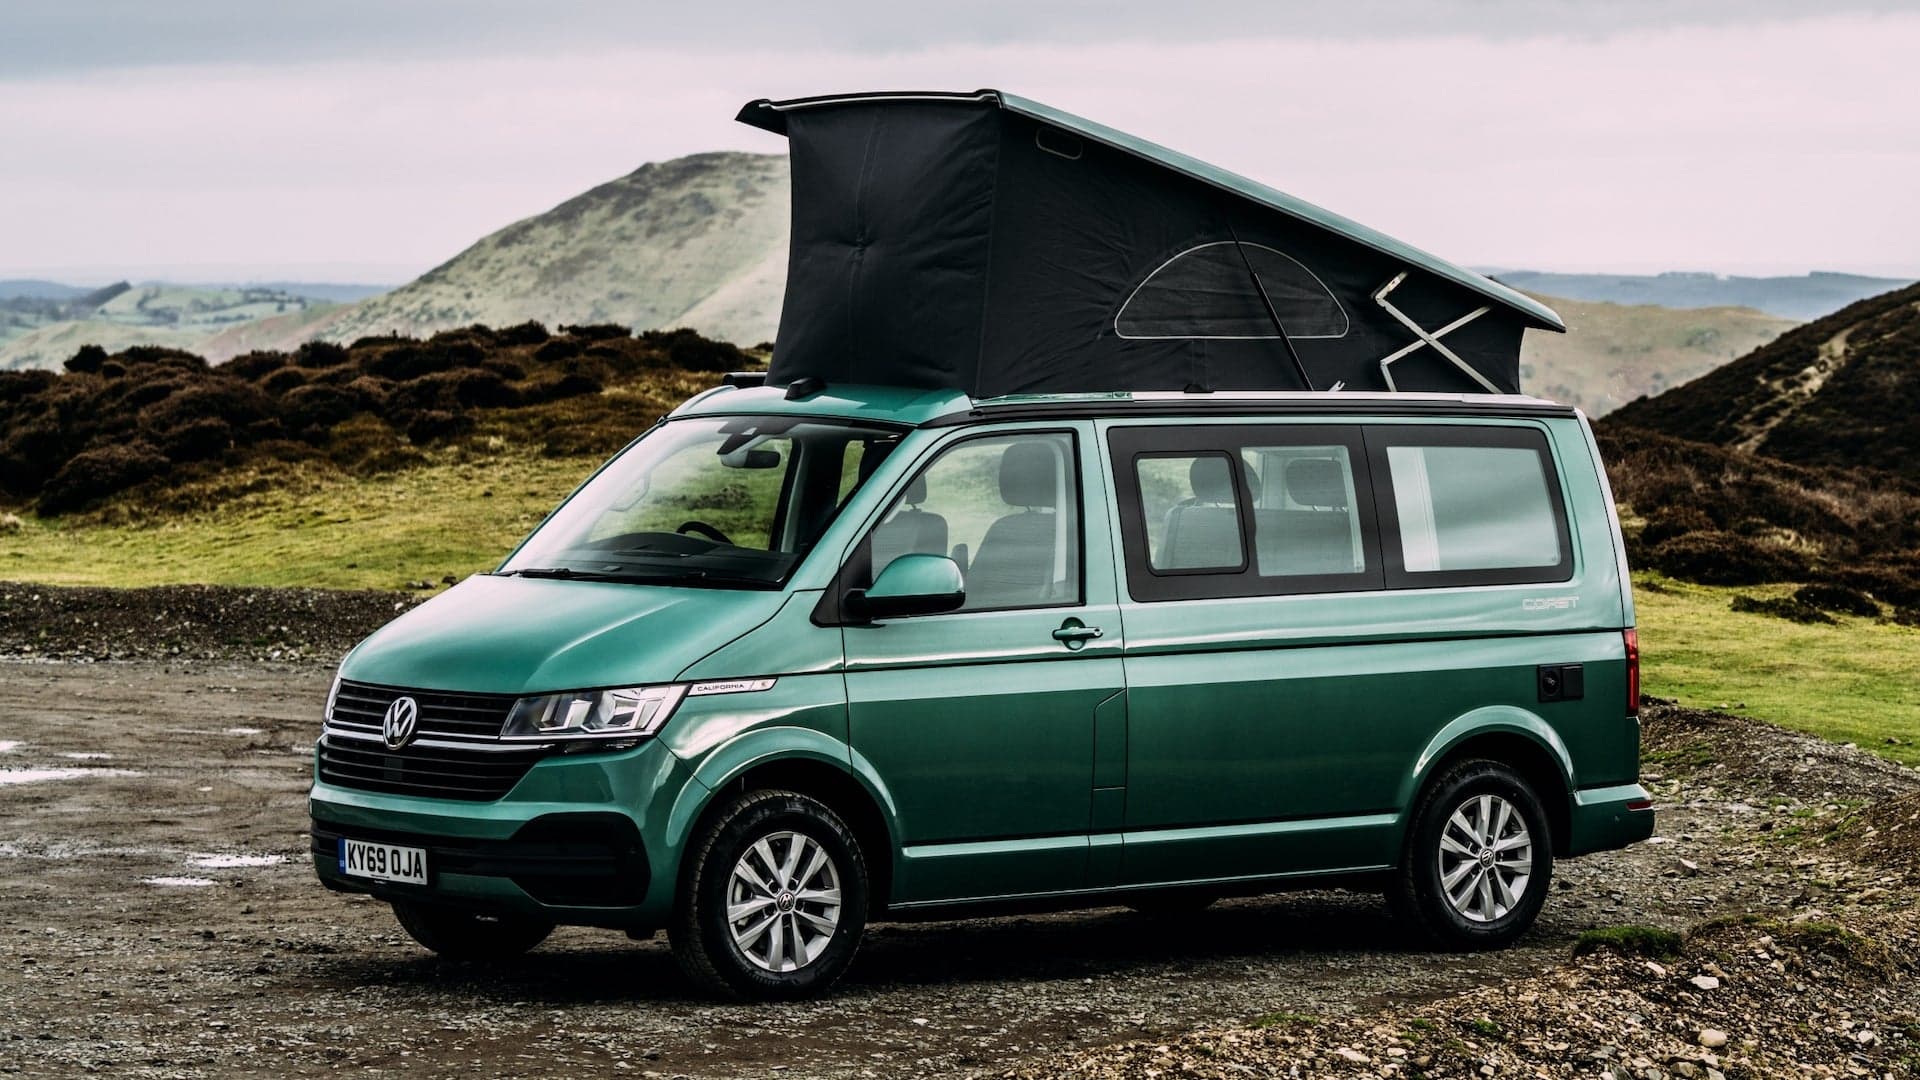 VW Says It Still Won’t Sell Camper Vans in America Despite RV Craze. Here’s Why